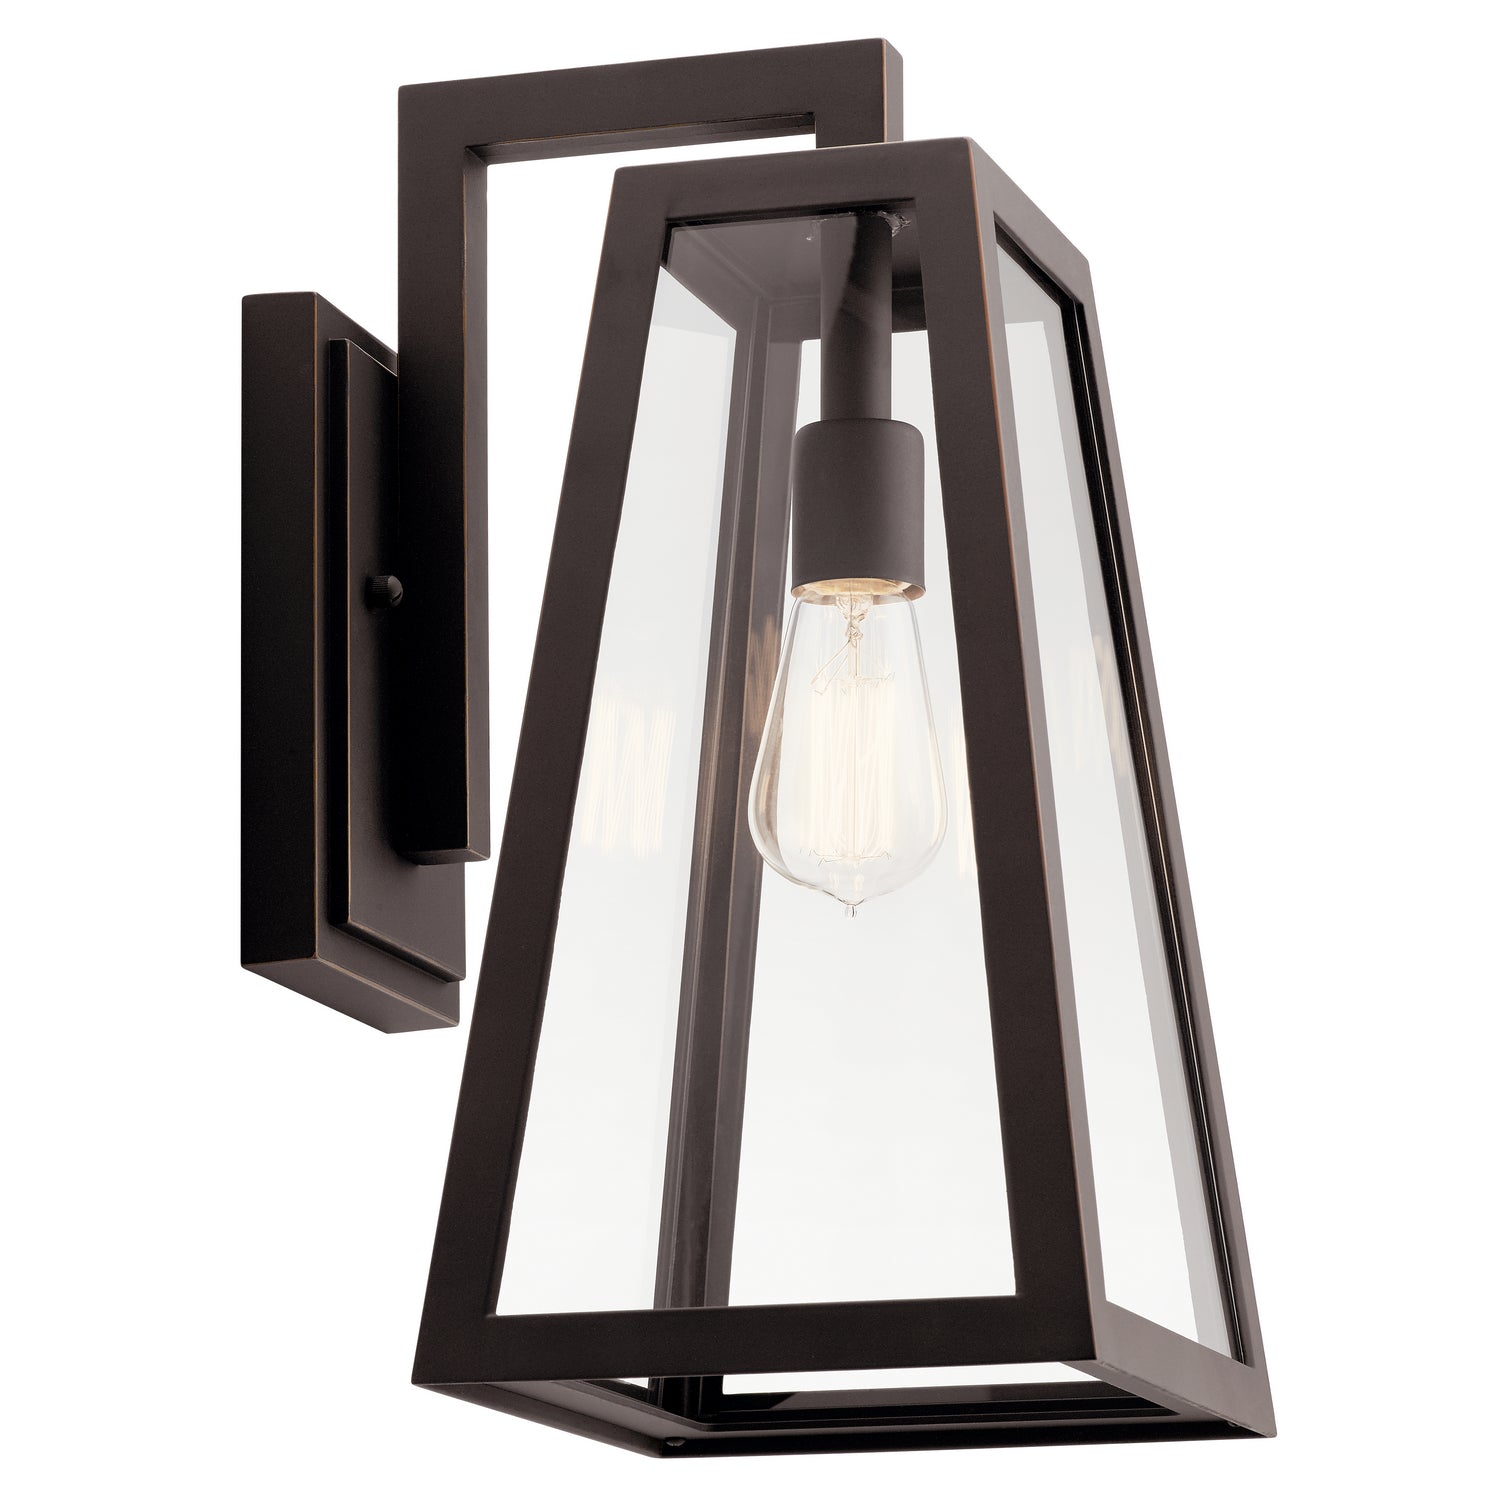 Kichler Canada - One Light Outdoor Wall Mount - Delison - Rubbed Bronze- Union Lighting Luminaires Decor